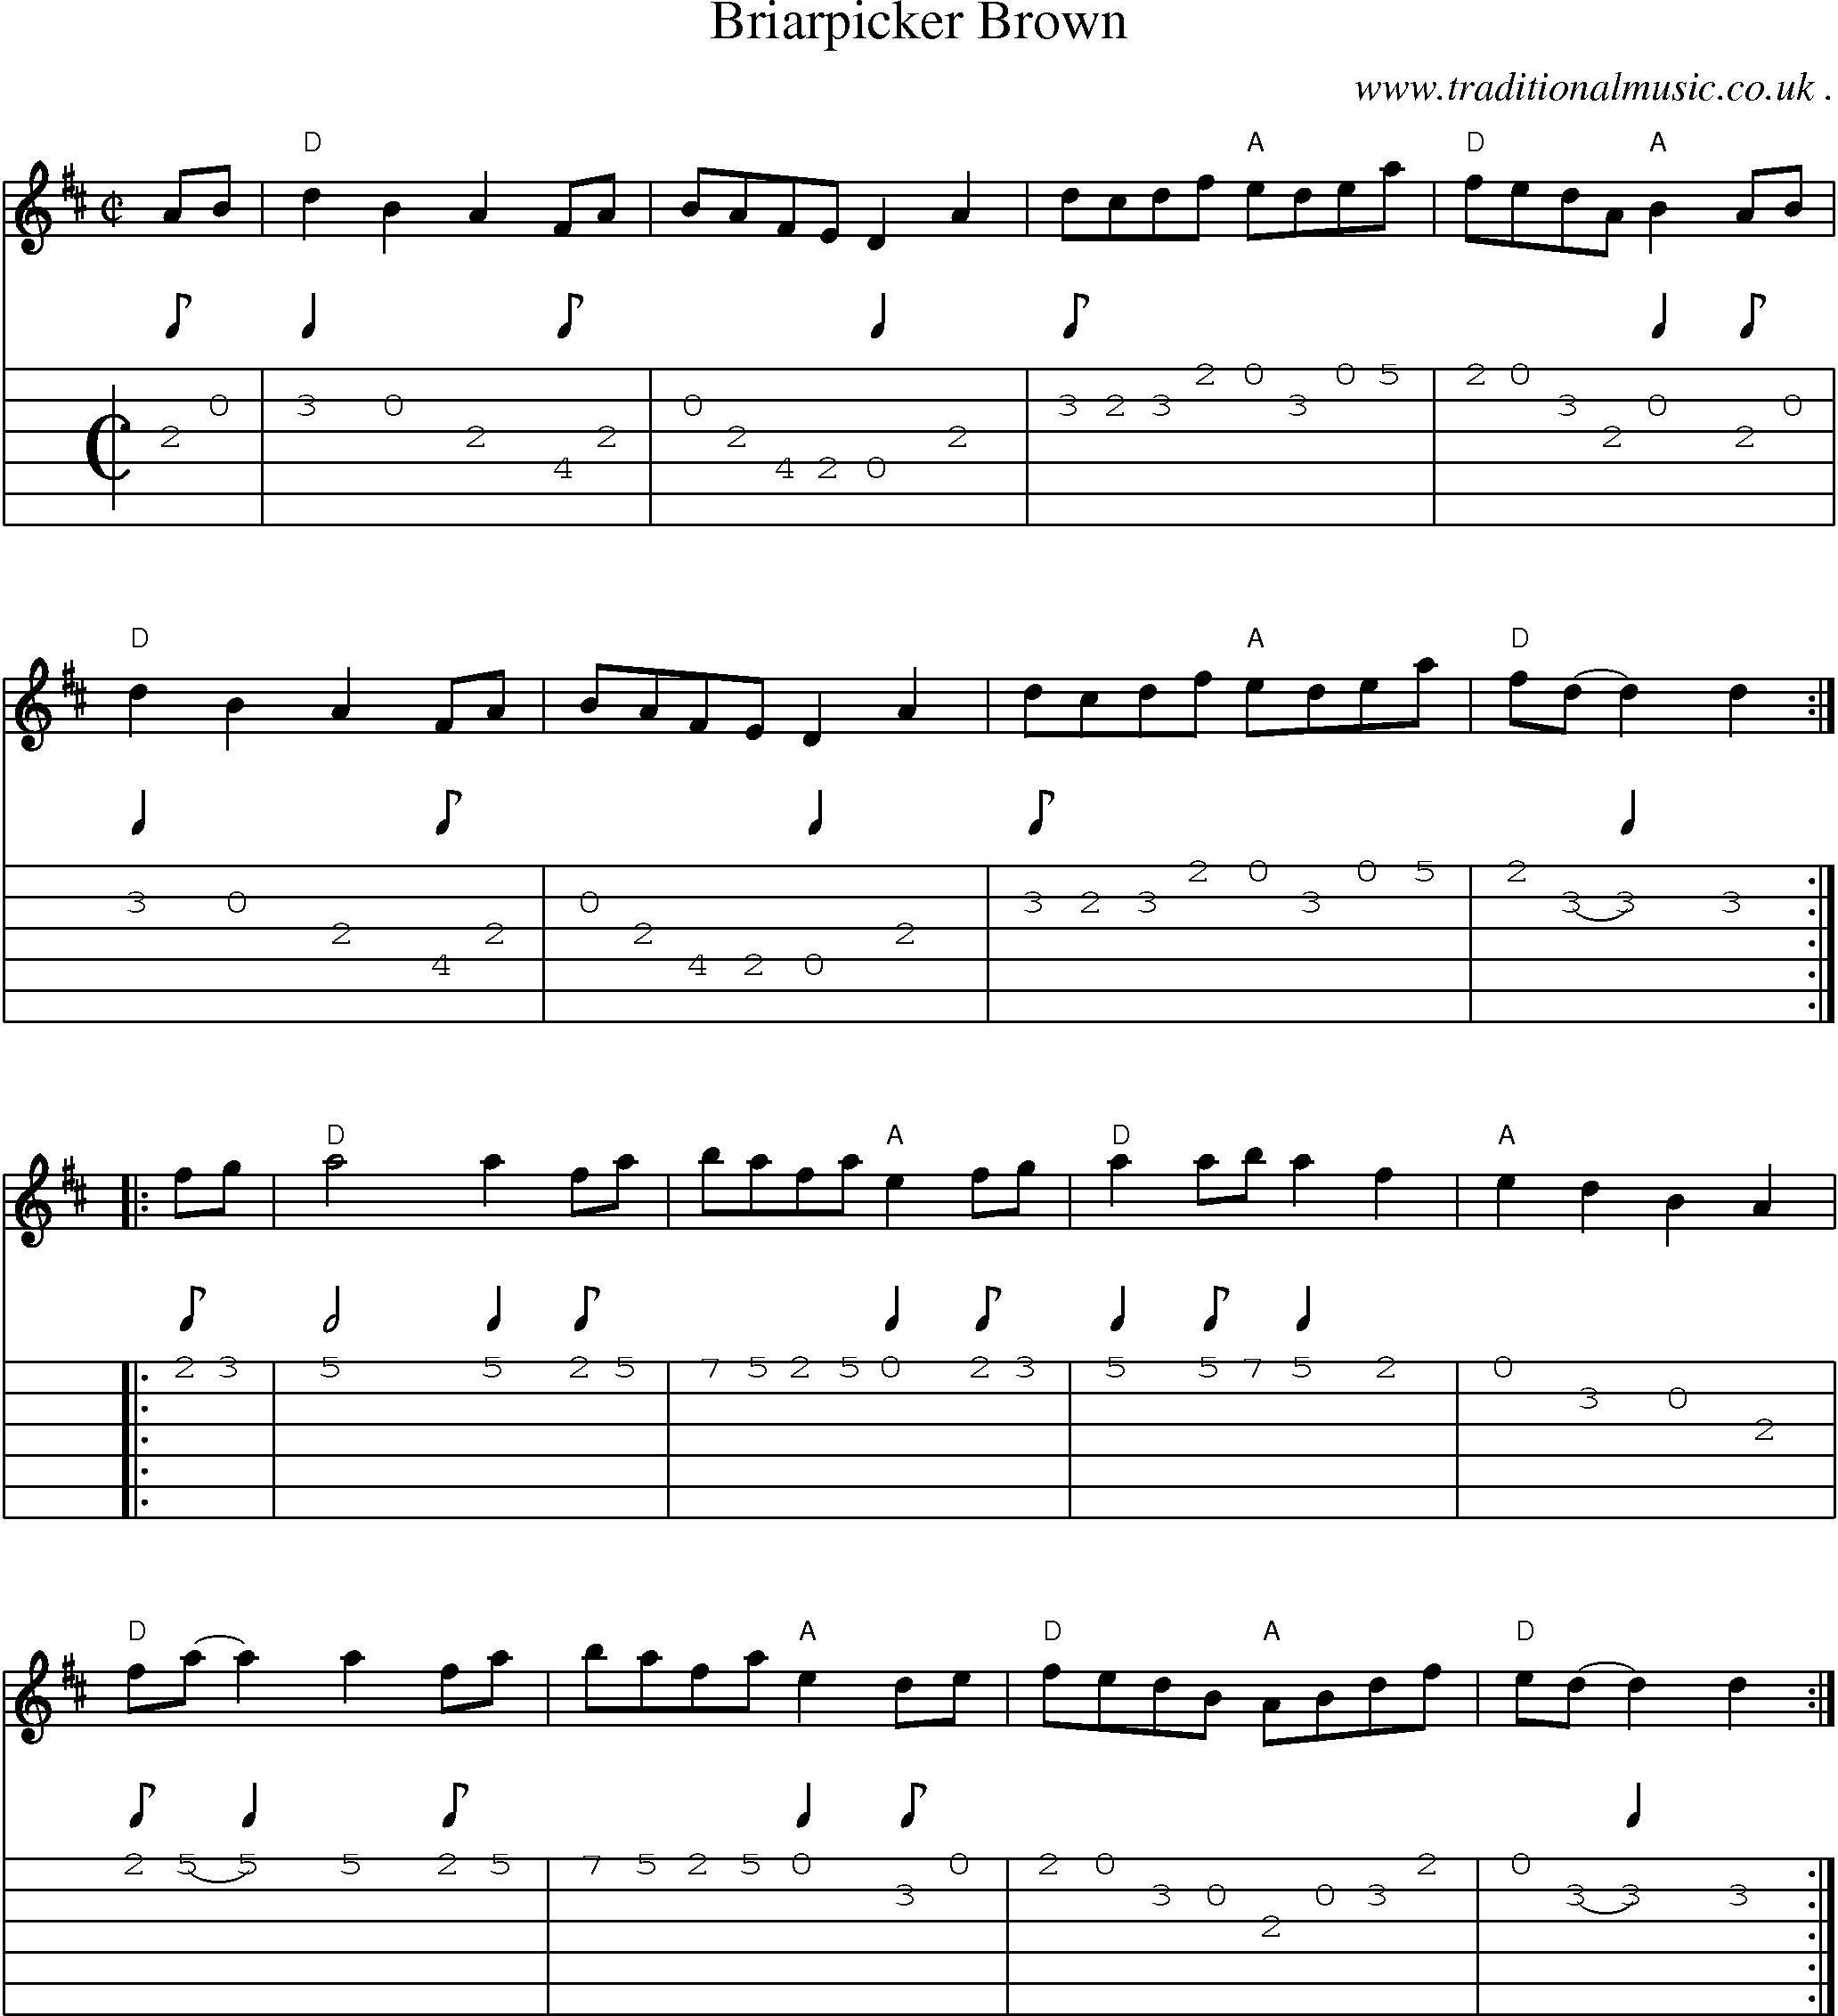 Music Score and Guitar Tabs for Briarpicker Brown